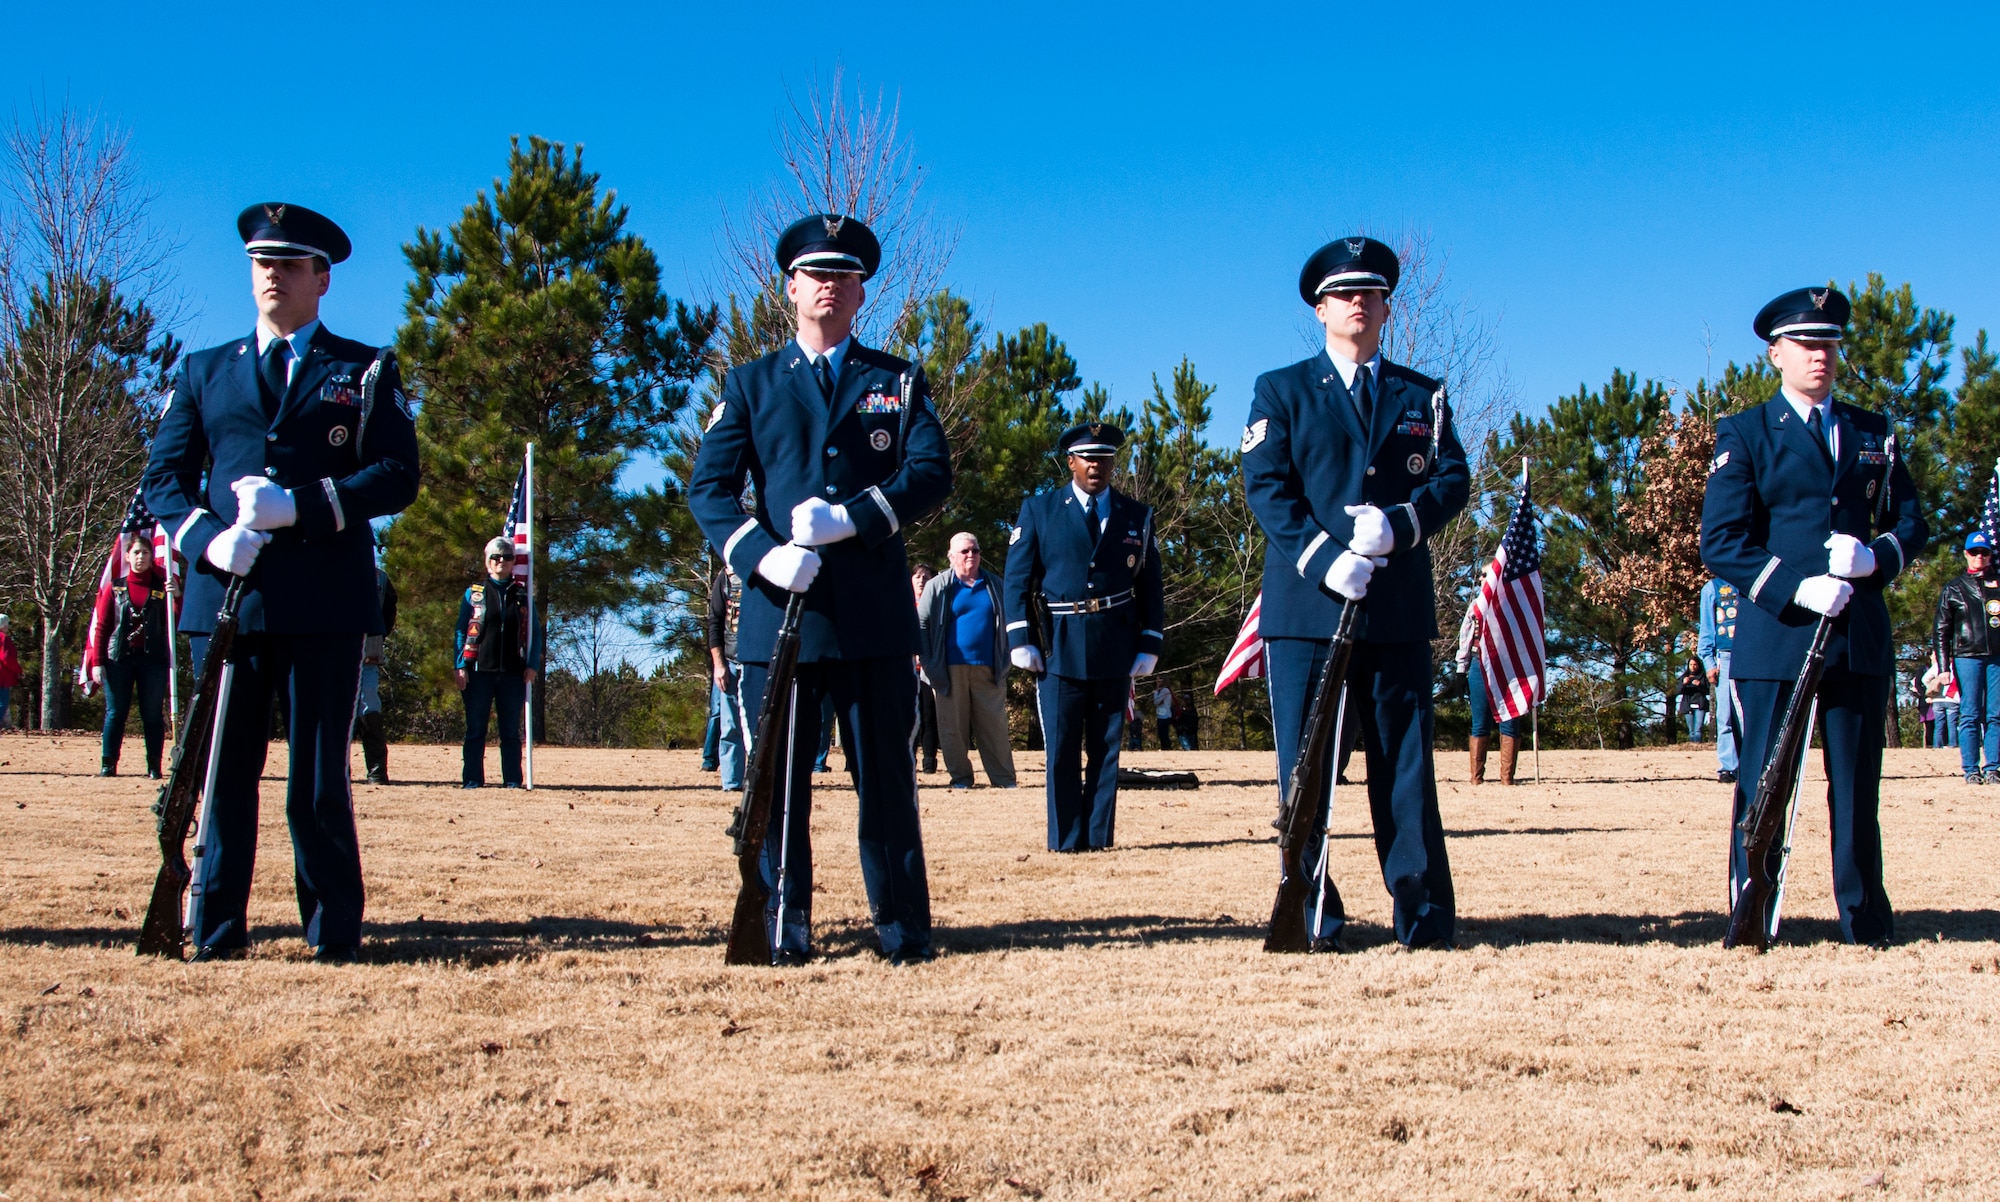 Honor Guard members from Dobbins Air Reserve Base, Ga. stand in formation for Wreaths Across America ceremony at Georgia National Cemetery in Canton, Ga. Dec. 13, 2014. The vision of the U.S. Air Force Honor Guard is to ensure a legacy of Airmen who promote the mission, protect the standards, perfect the image and preserve the heritage of the organization. (U.S. Air Force photo/Senior Airman Daniel Phelps)